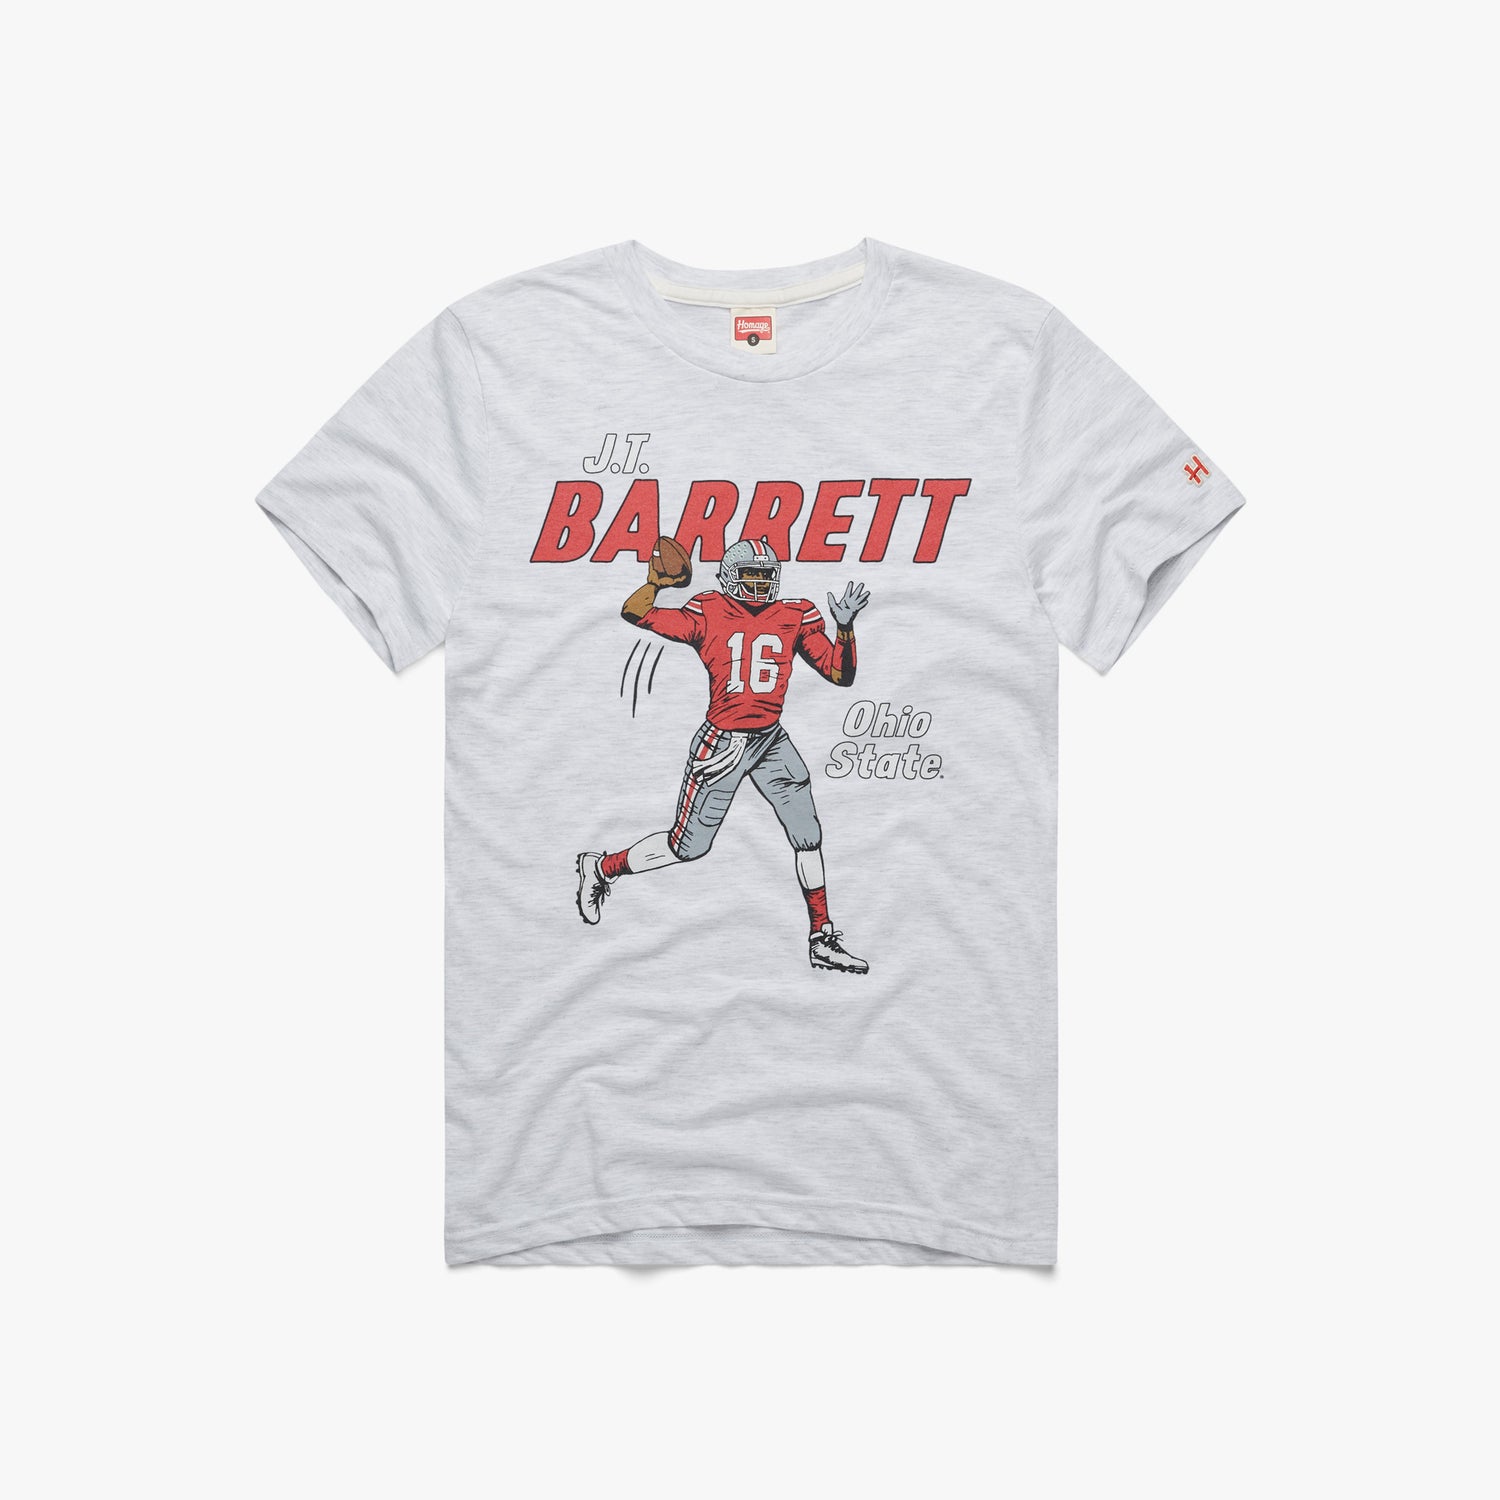 J.T. Barrett Ohio State T-Shirt from Homage. | Officially Licensed Ohio State Gear | Ash | Ohio State Vintage Apparel from Homage.